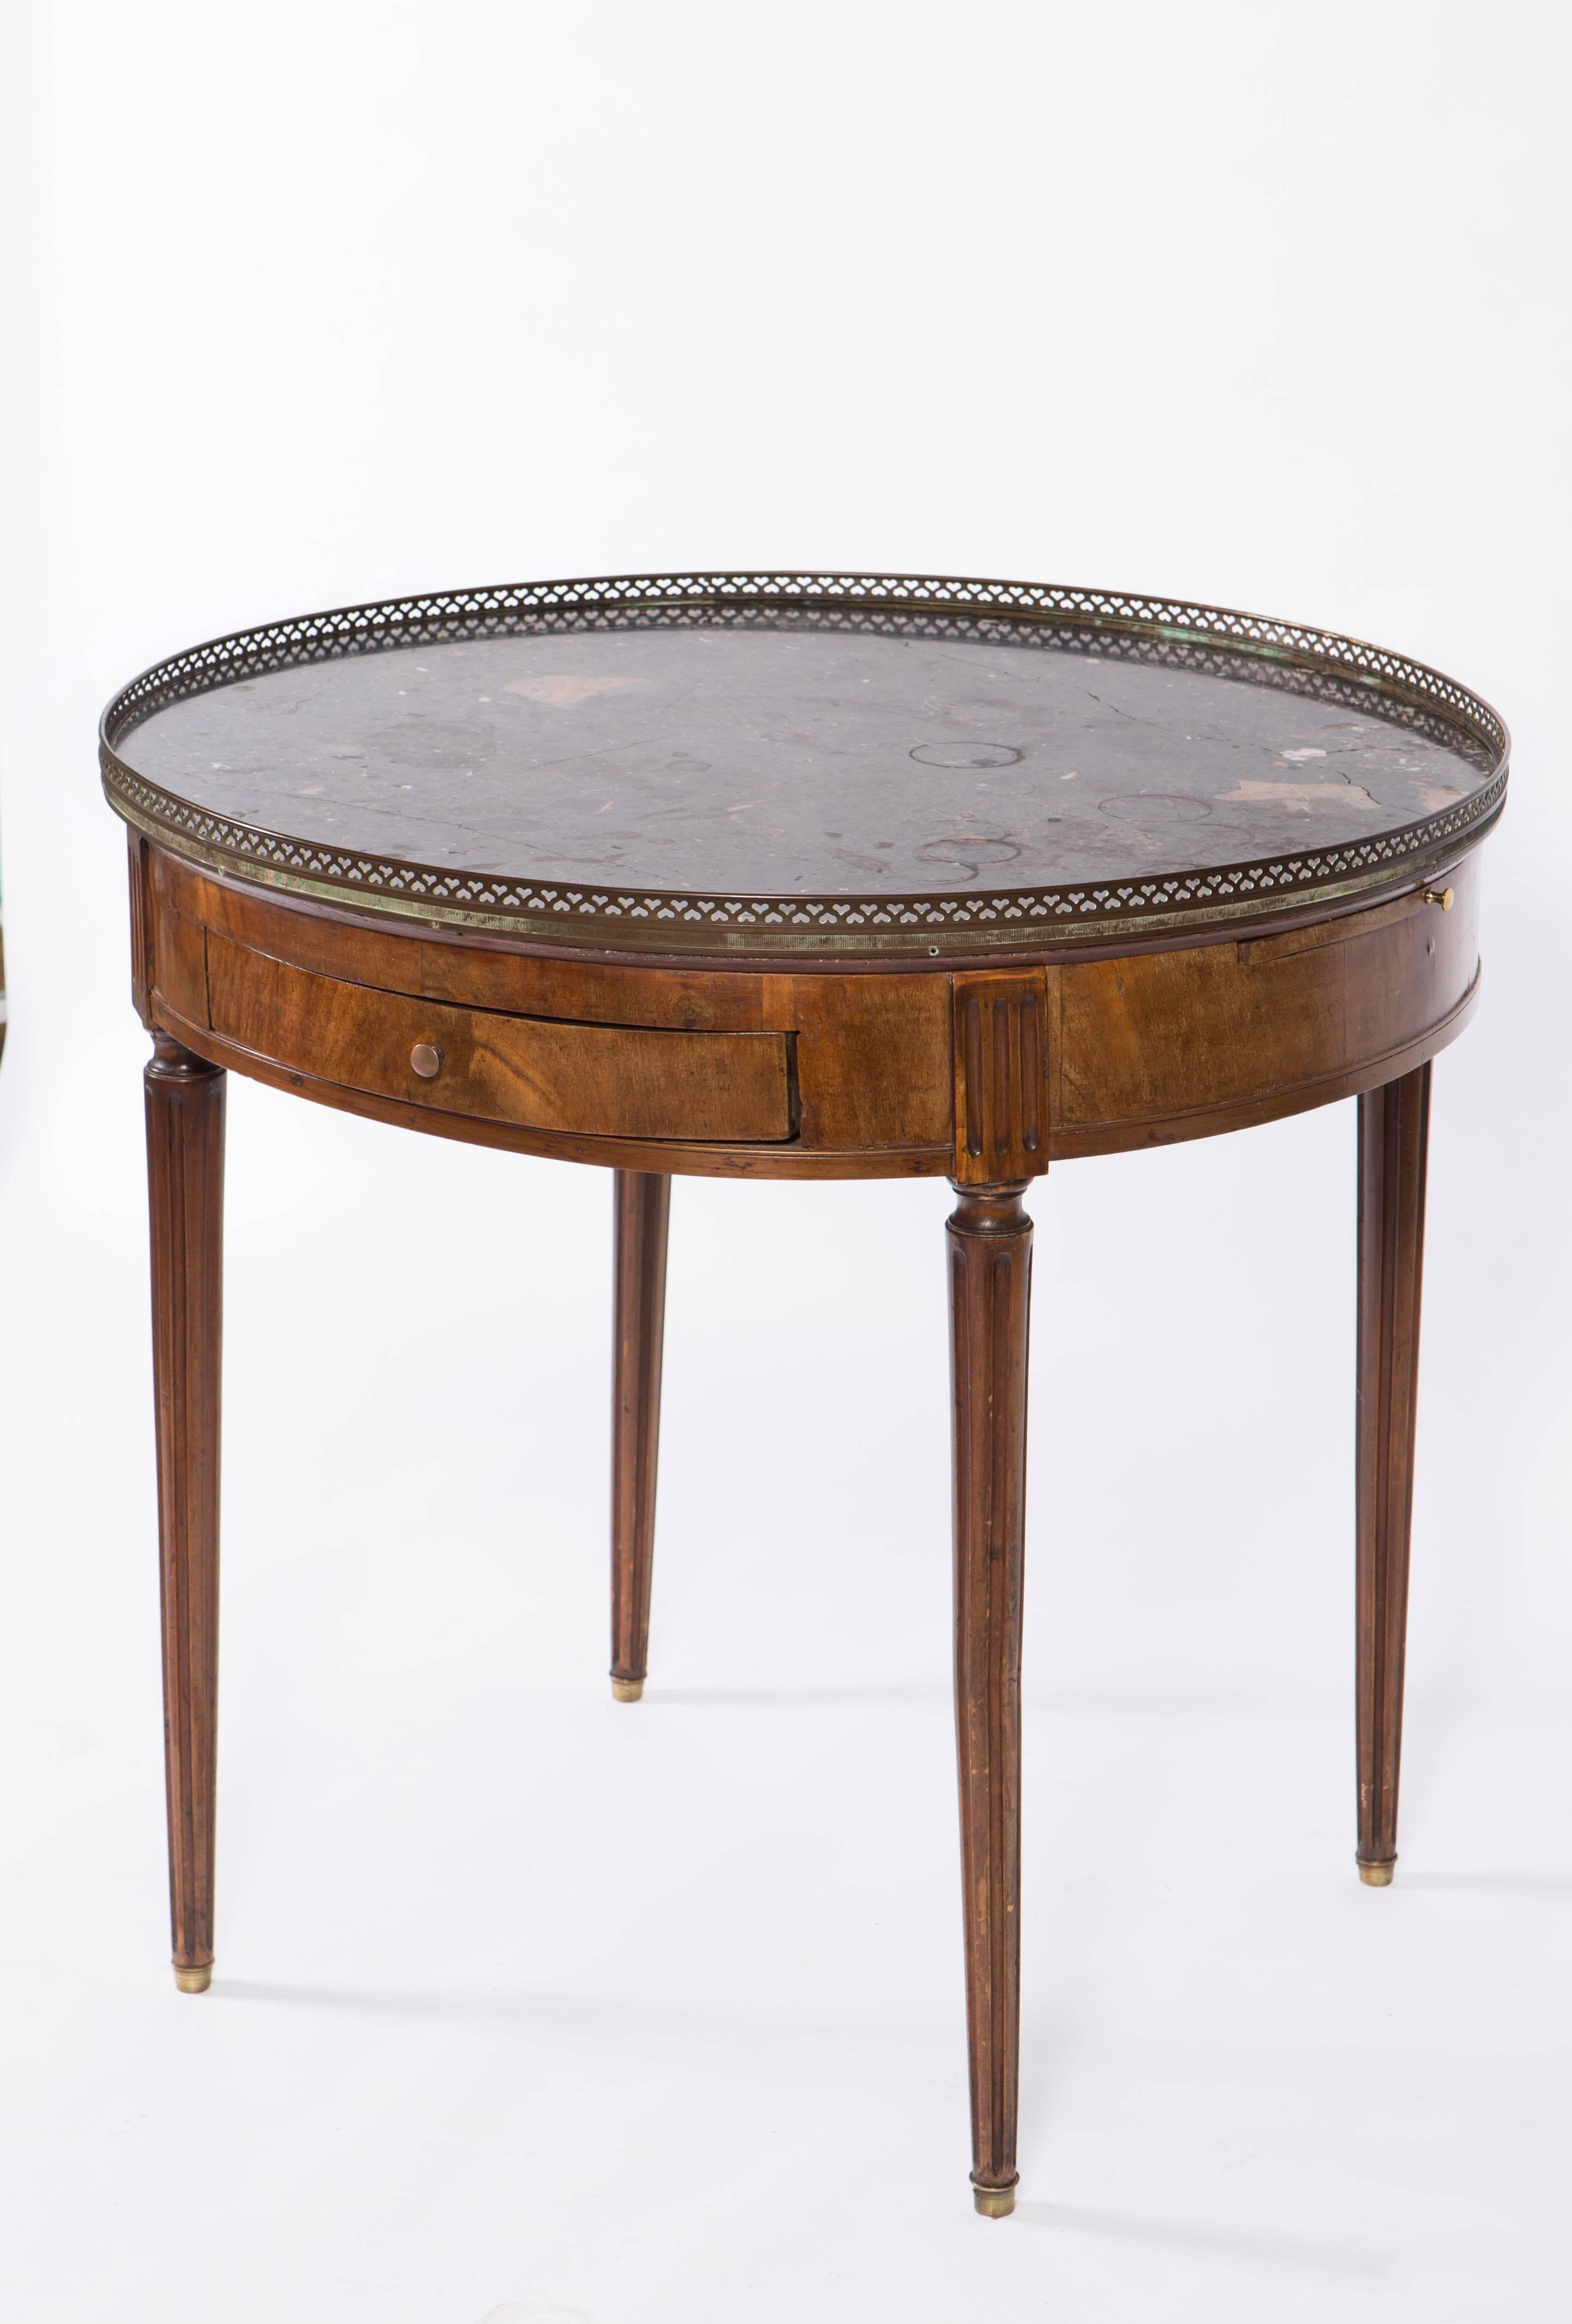 19th Century French Round Mahogany Side Table with Marble Top 1